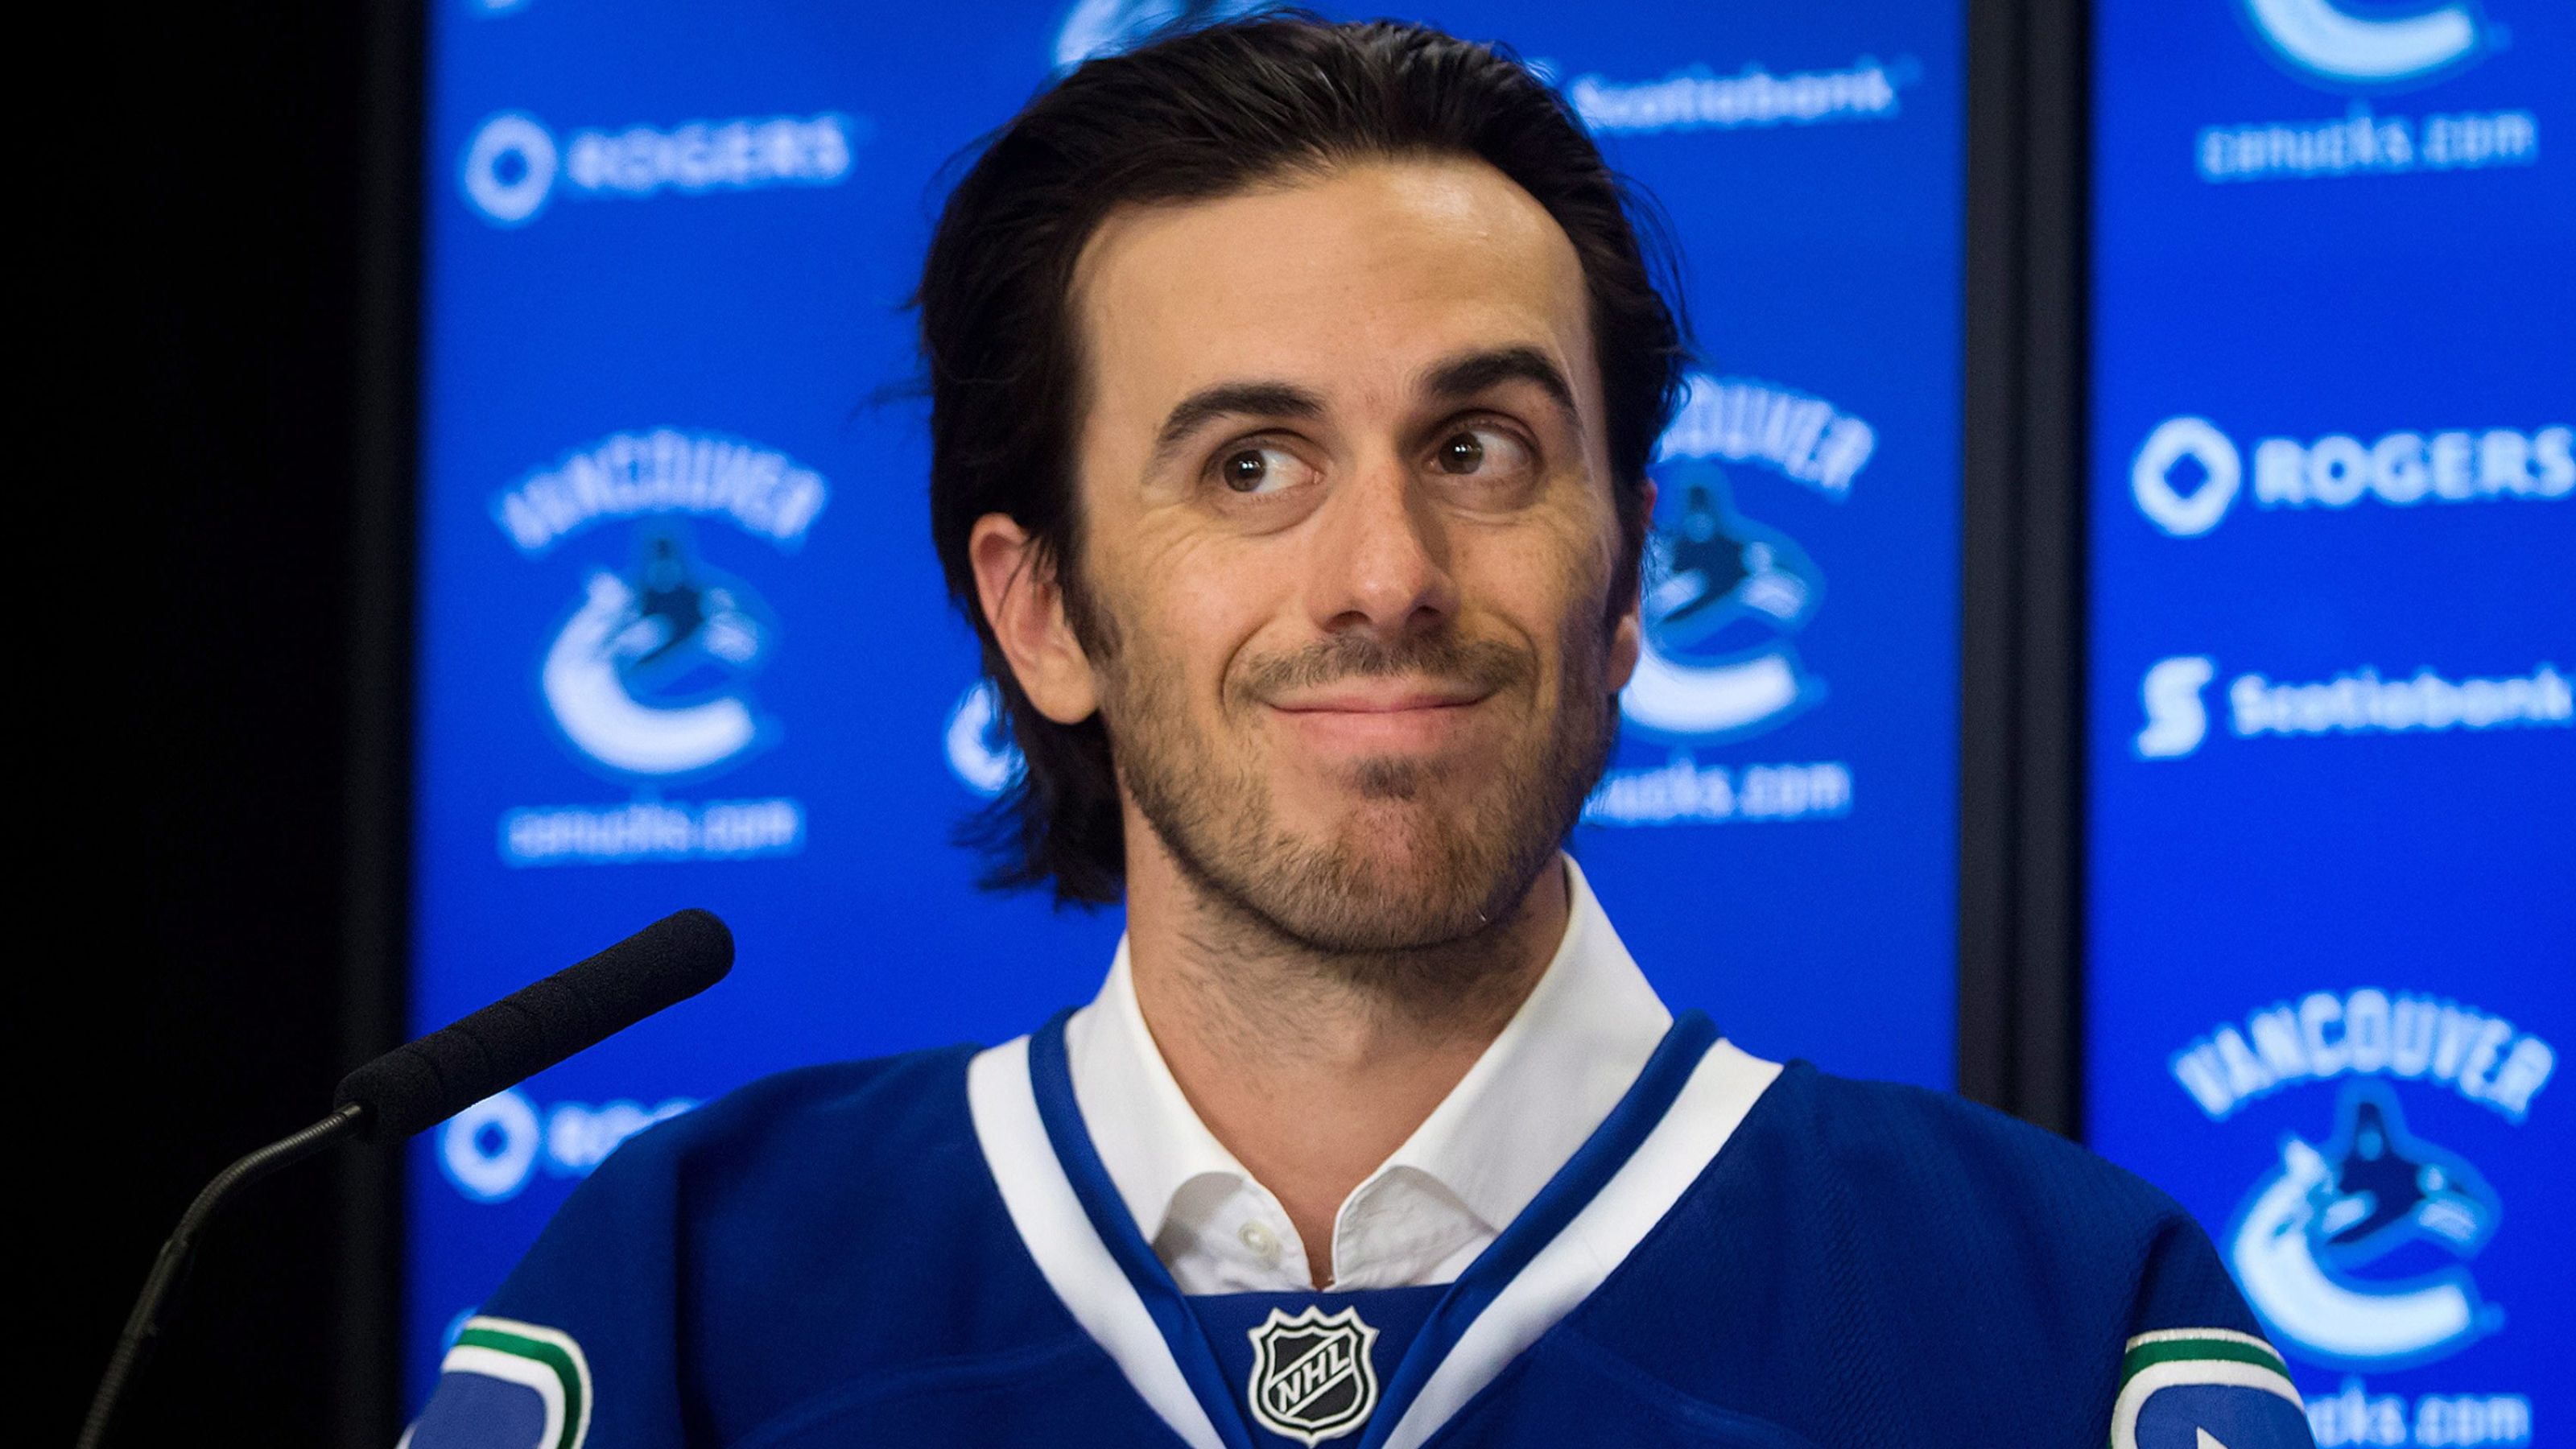 Ryan Miller Backgrounds, Compatible - PC, Mobile, Gadgets| 3200x1800 px